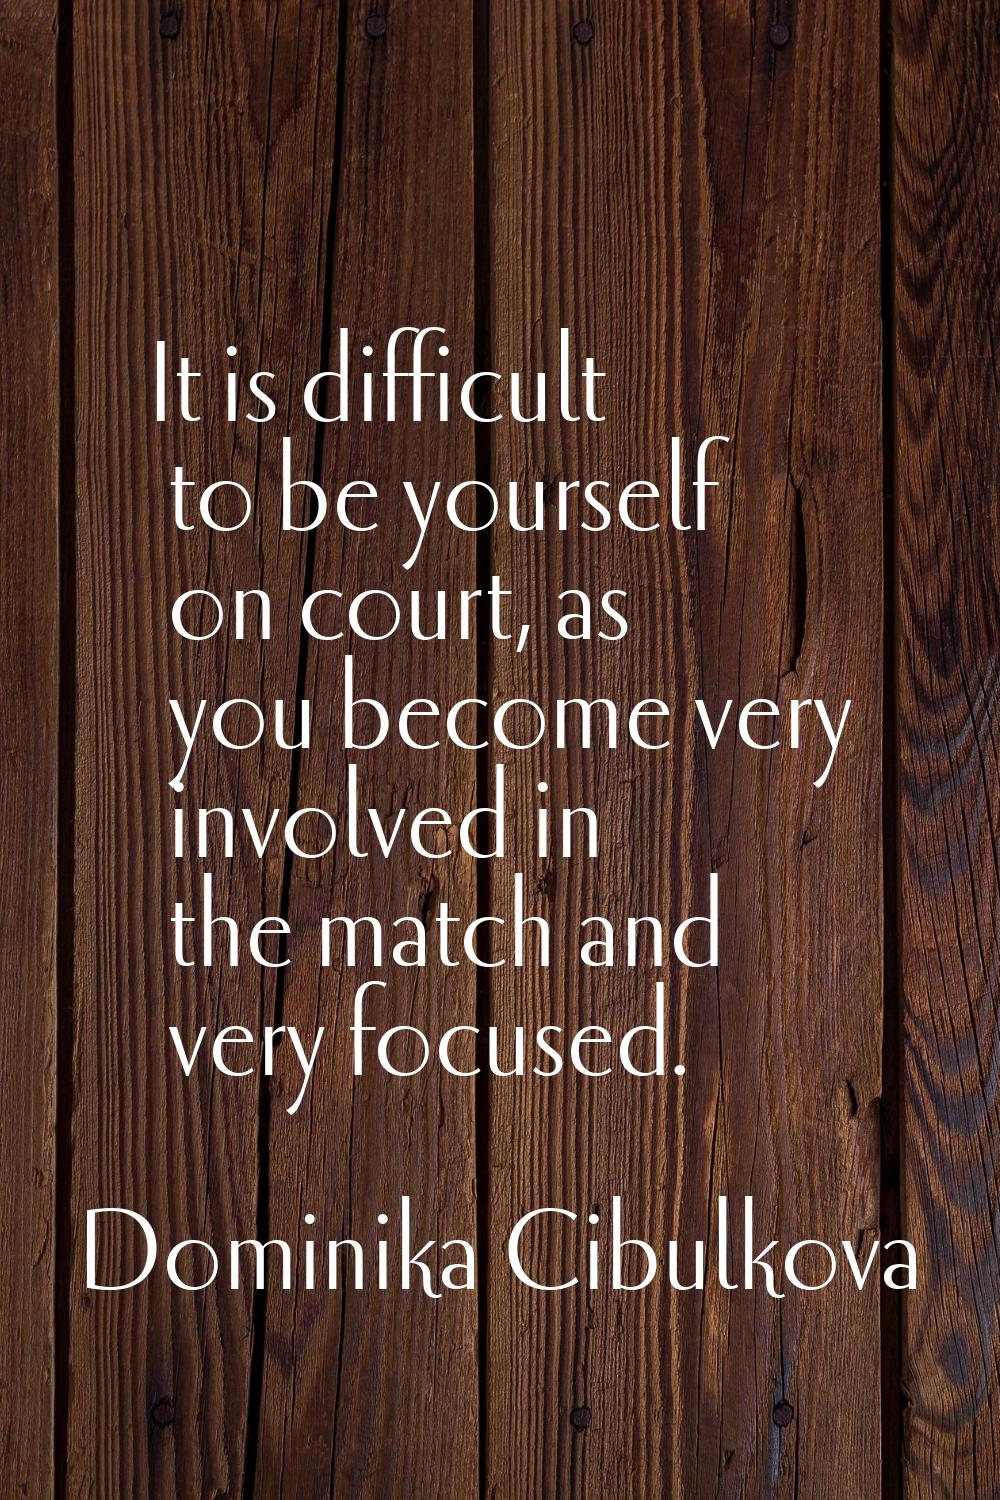 It is difficult to be yourself on court, as you become very involved in the match and very focused.